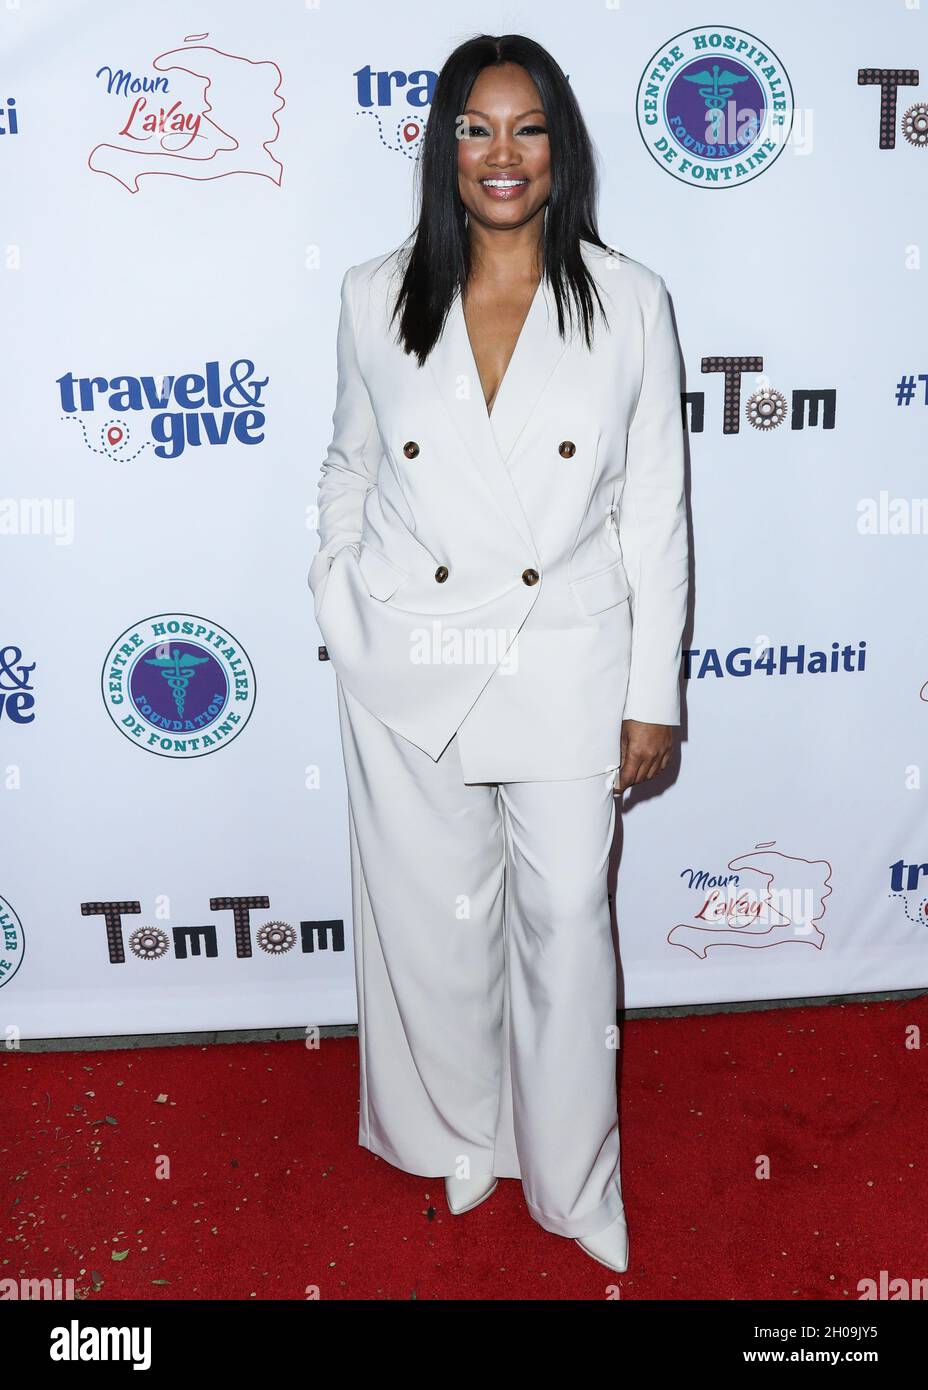 West Hollywood, United States. 11th Oct, 2021. WEST HOLLYWOOD, LOS ANGELES, CALIFORNIA, USA - OCTOBER 11: Actress Garcelle Beauvais arrives at Travel and GIVE's 4th Annual 'Travel With A Purpose' Fundraiser With Lisa Vanderpump (Fundraiser to Benefit Teletherapy Program and Communities in Haiti Affected by Earthquake) held at TOM TOM Restaurant and Bar on October 11, 2021 in West Hollywood, Los Angeles, California, United States. (Photo by Xavier Collin/Image Press Agency/Sipa USA) Credit: Sipa USA/Alamy Live News Stock Photo